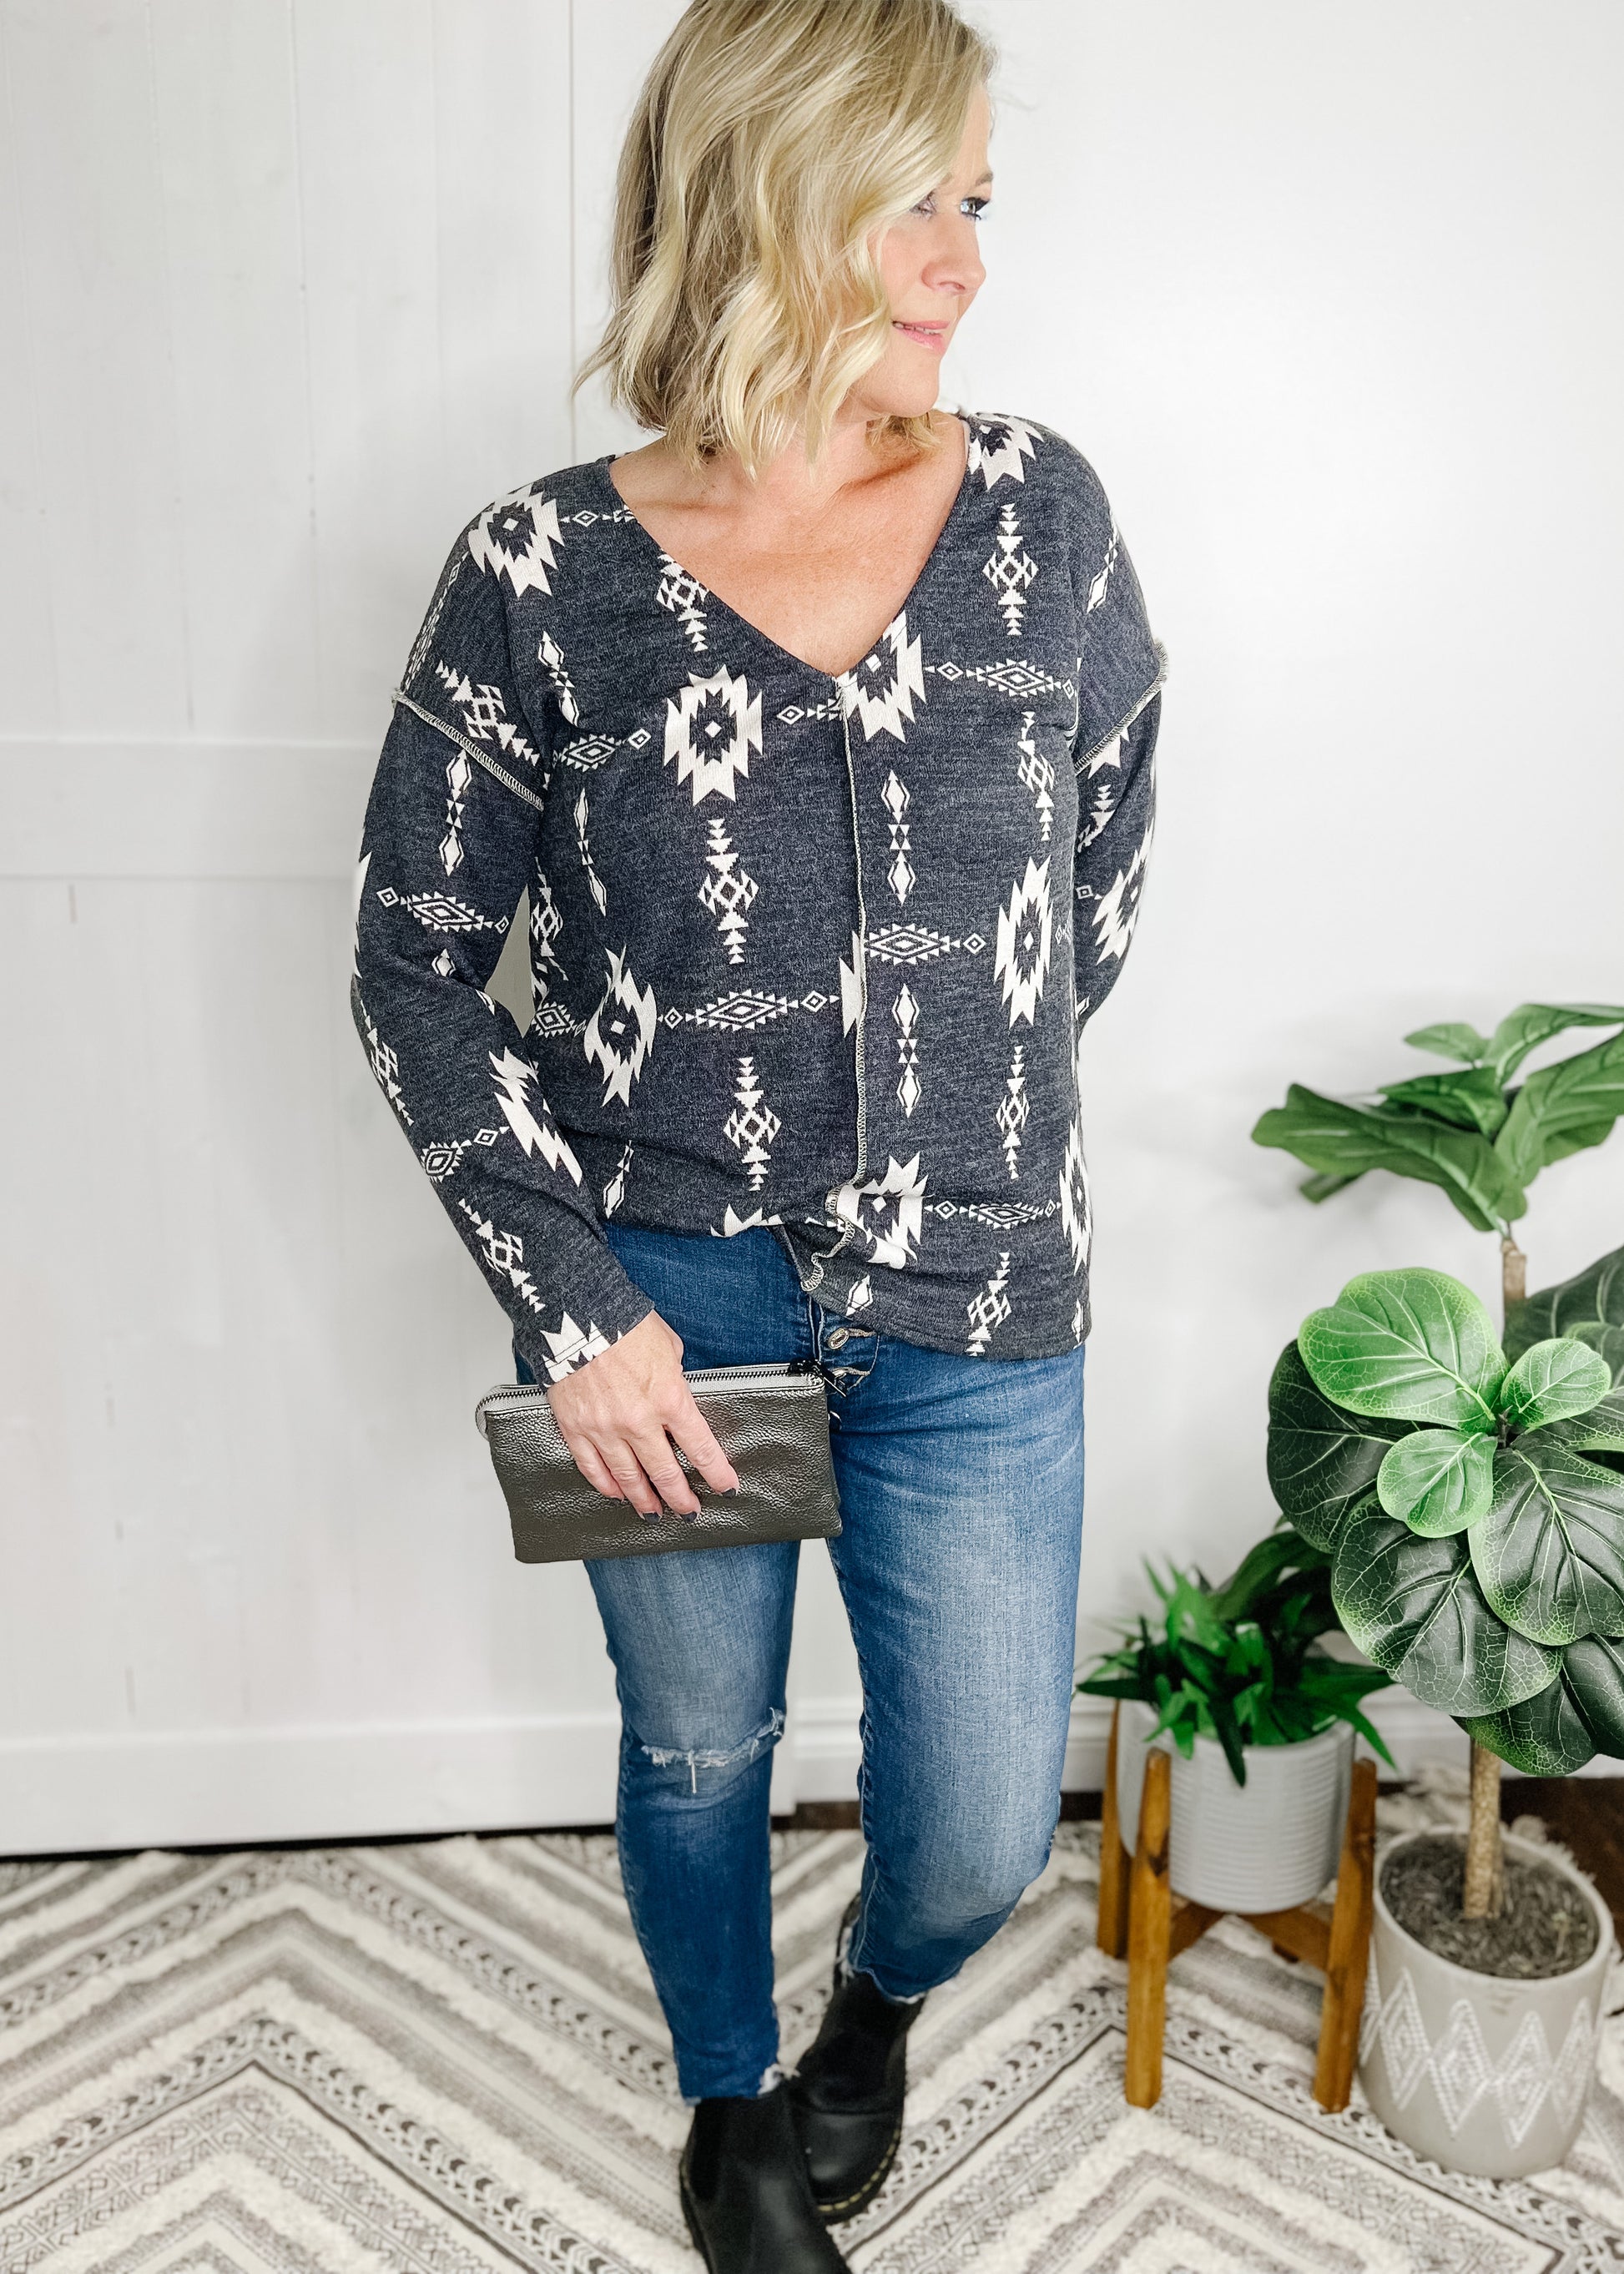 Aztec print top in  Charcoal. Top features, deep v neckline, long sleeves, straight hemline, stitch detail going down front and at shoulder.  Shown with out high rise skinny jeans. 